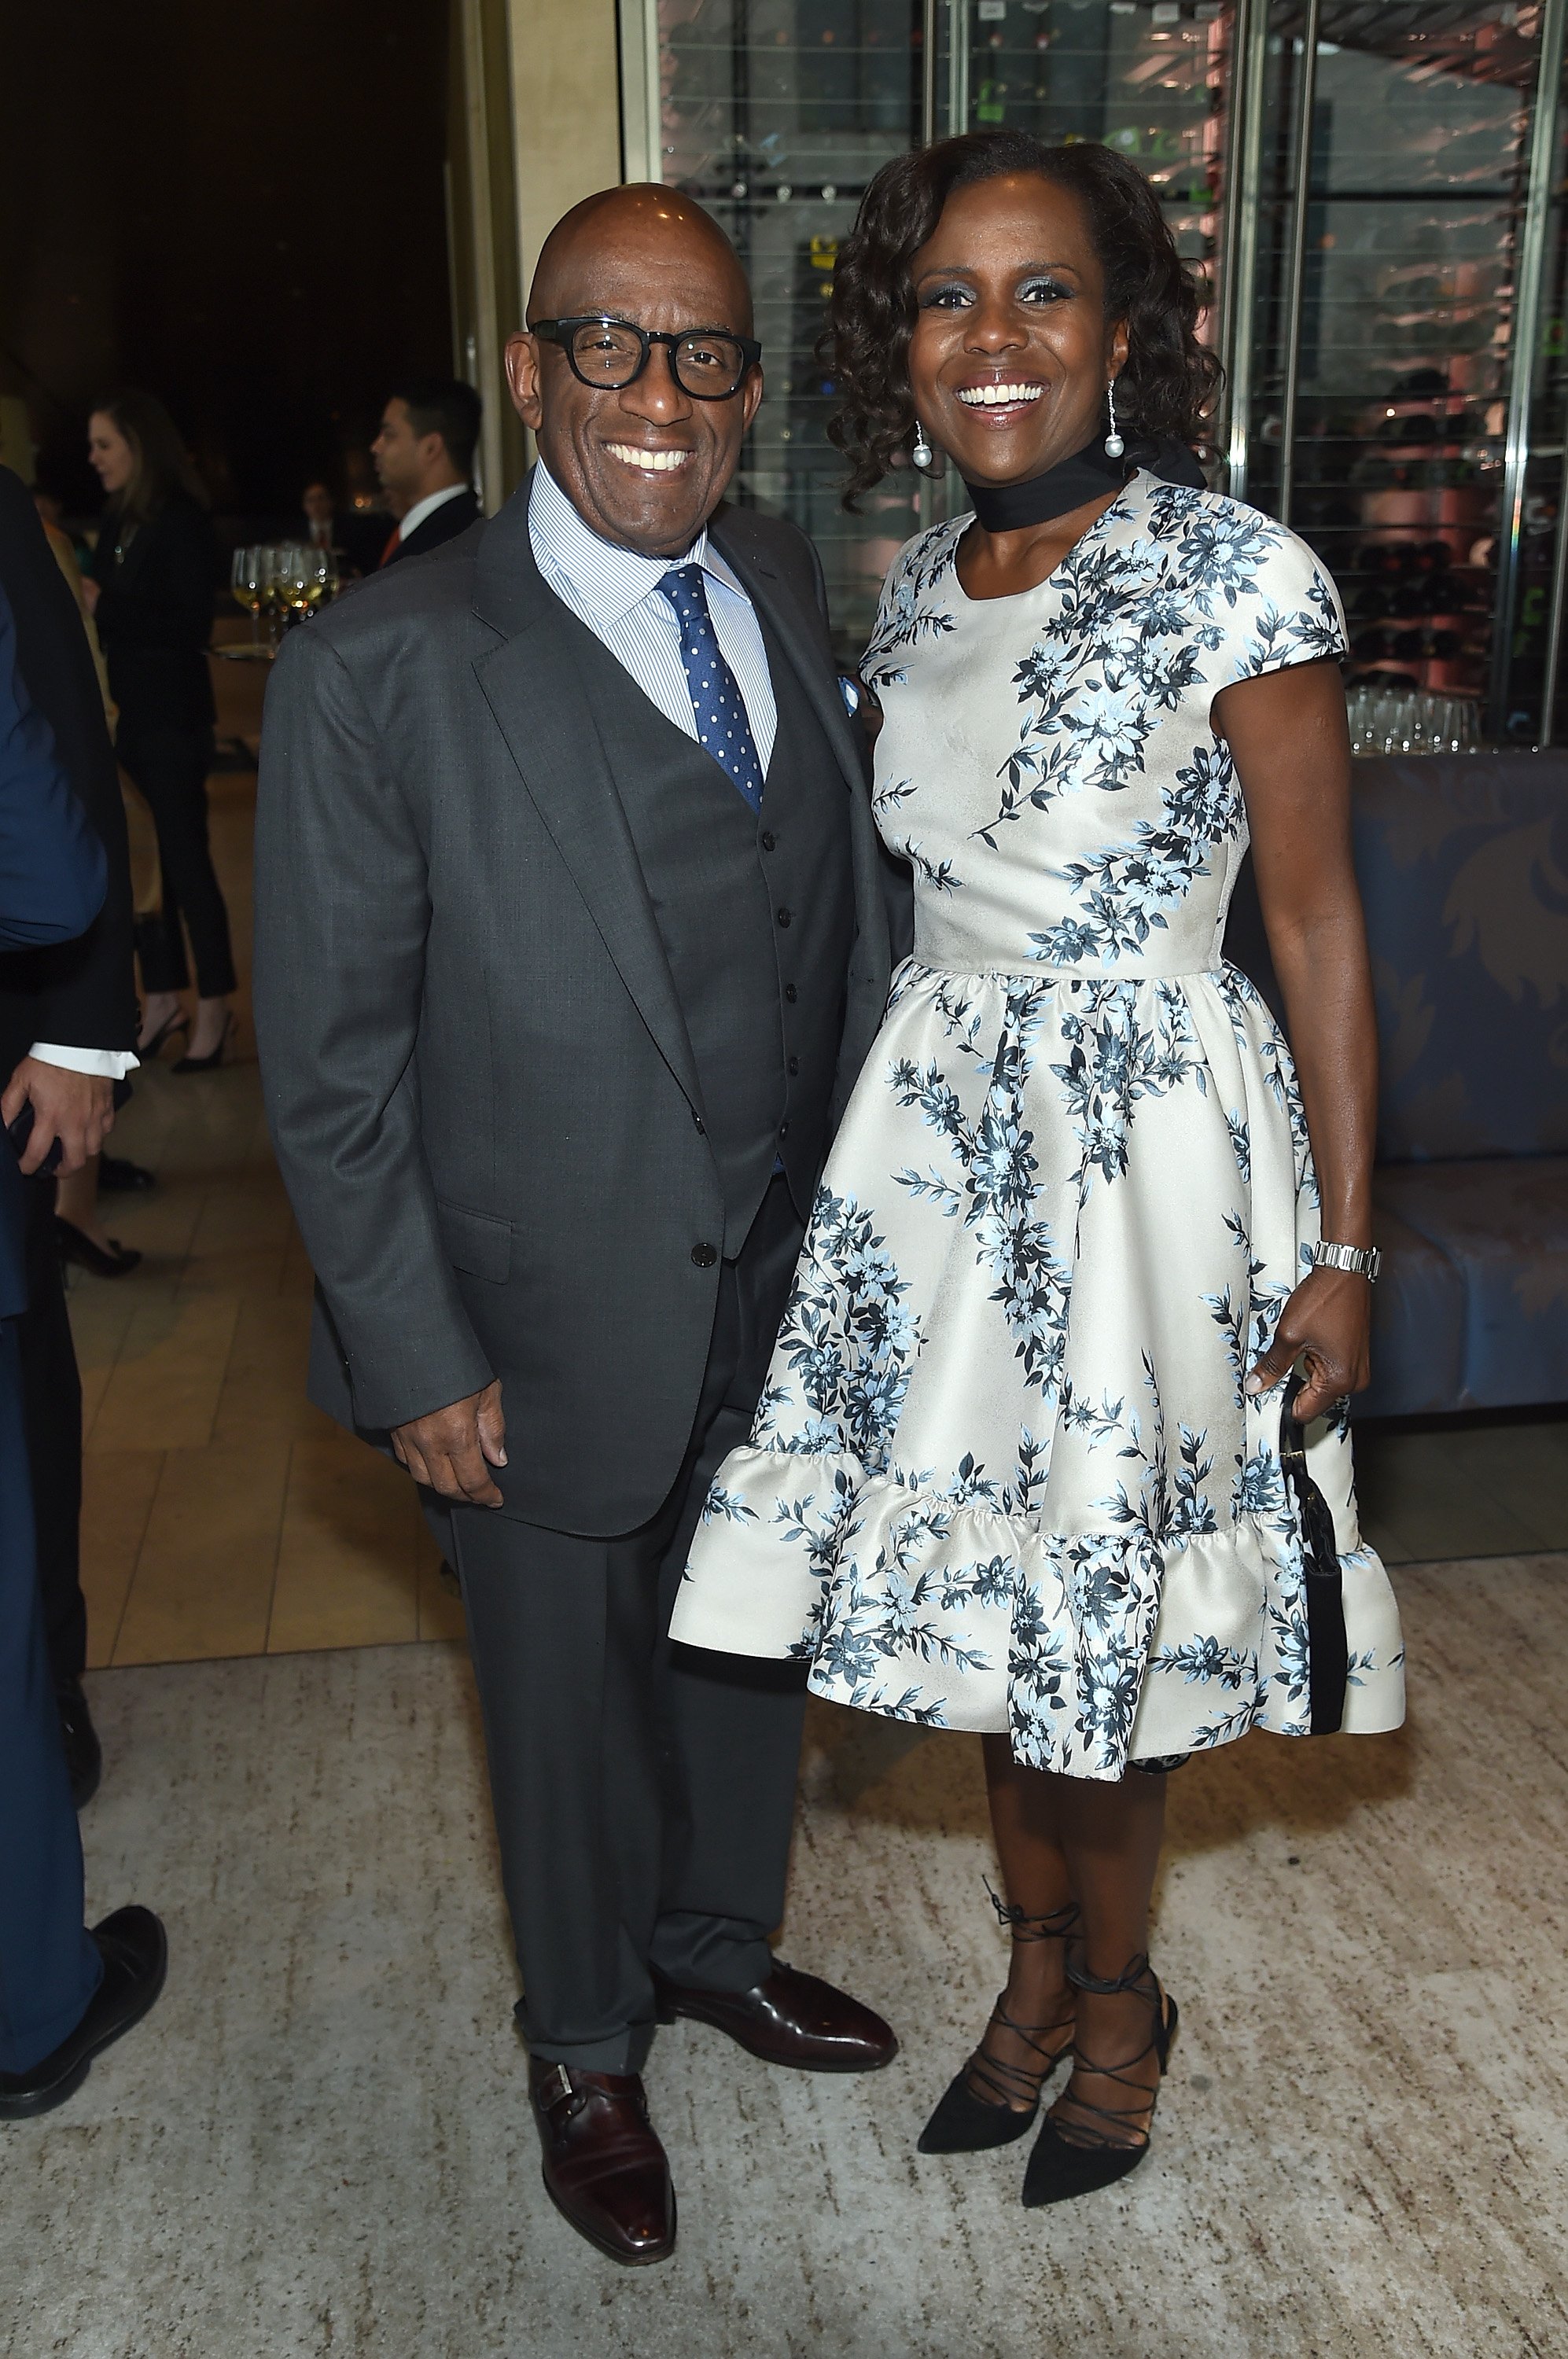 Al Roker and  Deborah Roberts attend the 45th Chaplin Award Gala at Alice Tully Hall, Lincoln Center on April 30, 2018 in New York City. | Source: Getty Images